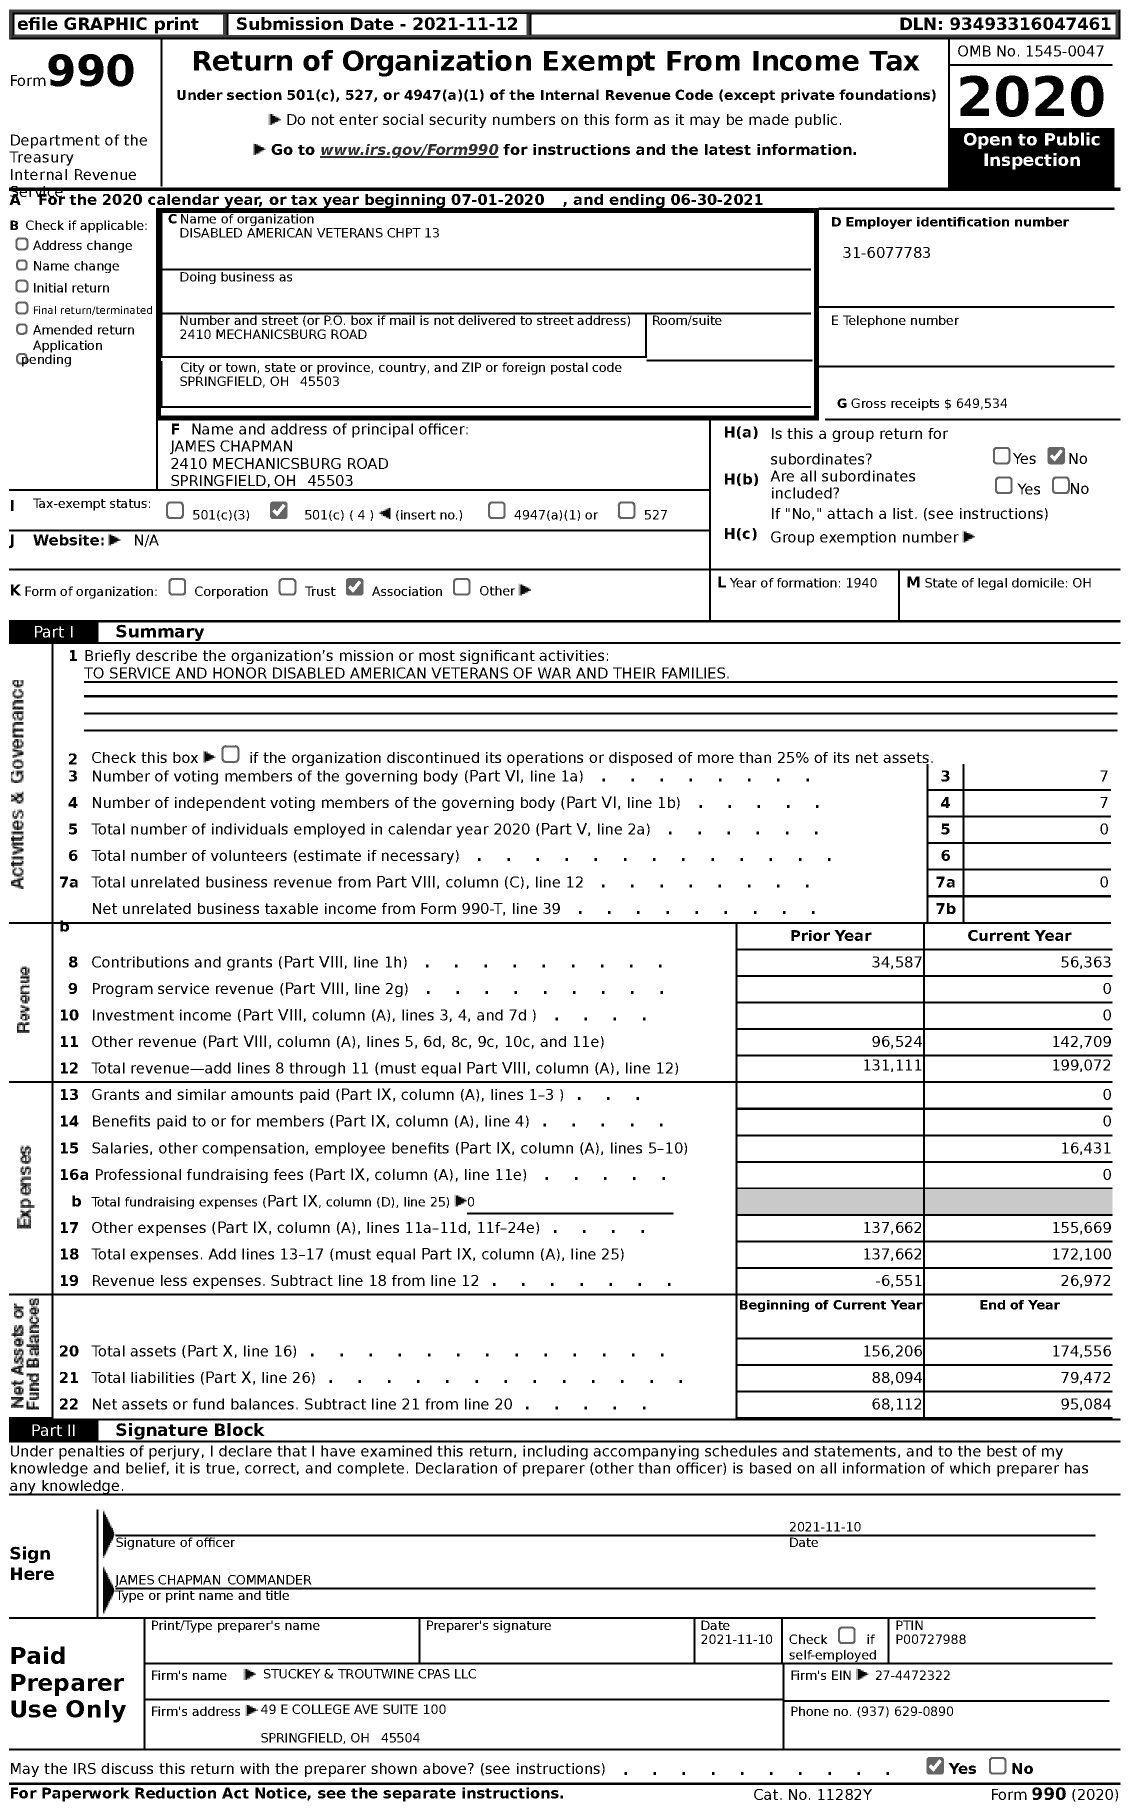 Image of first page of 2020 Form 990 for Disabled American Veterans CHPT 13